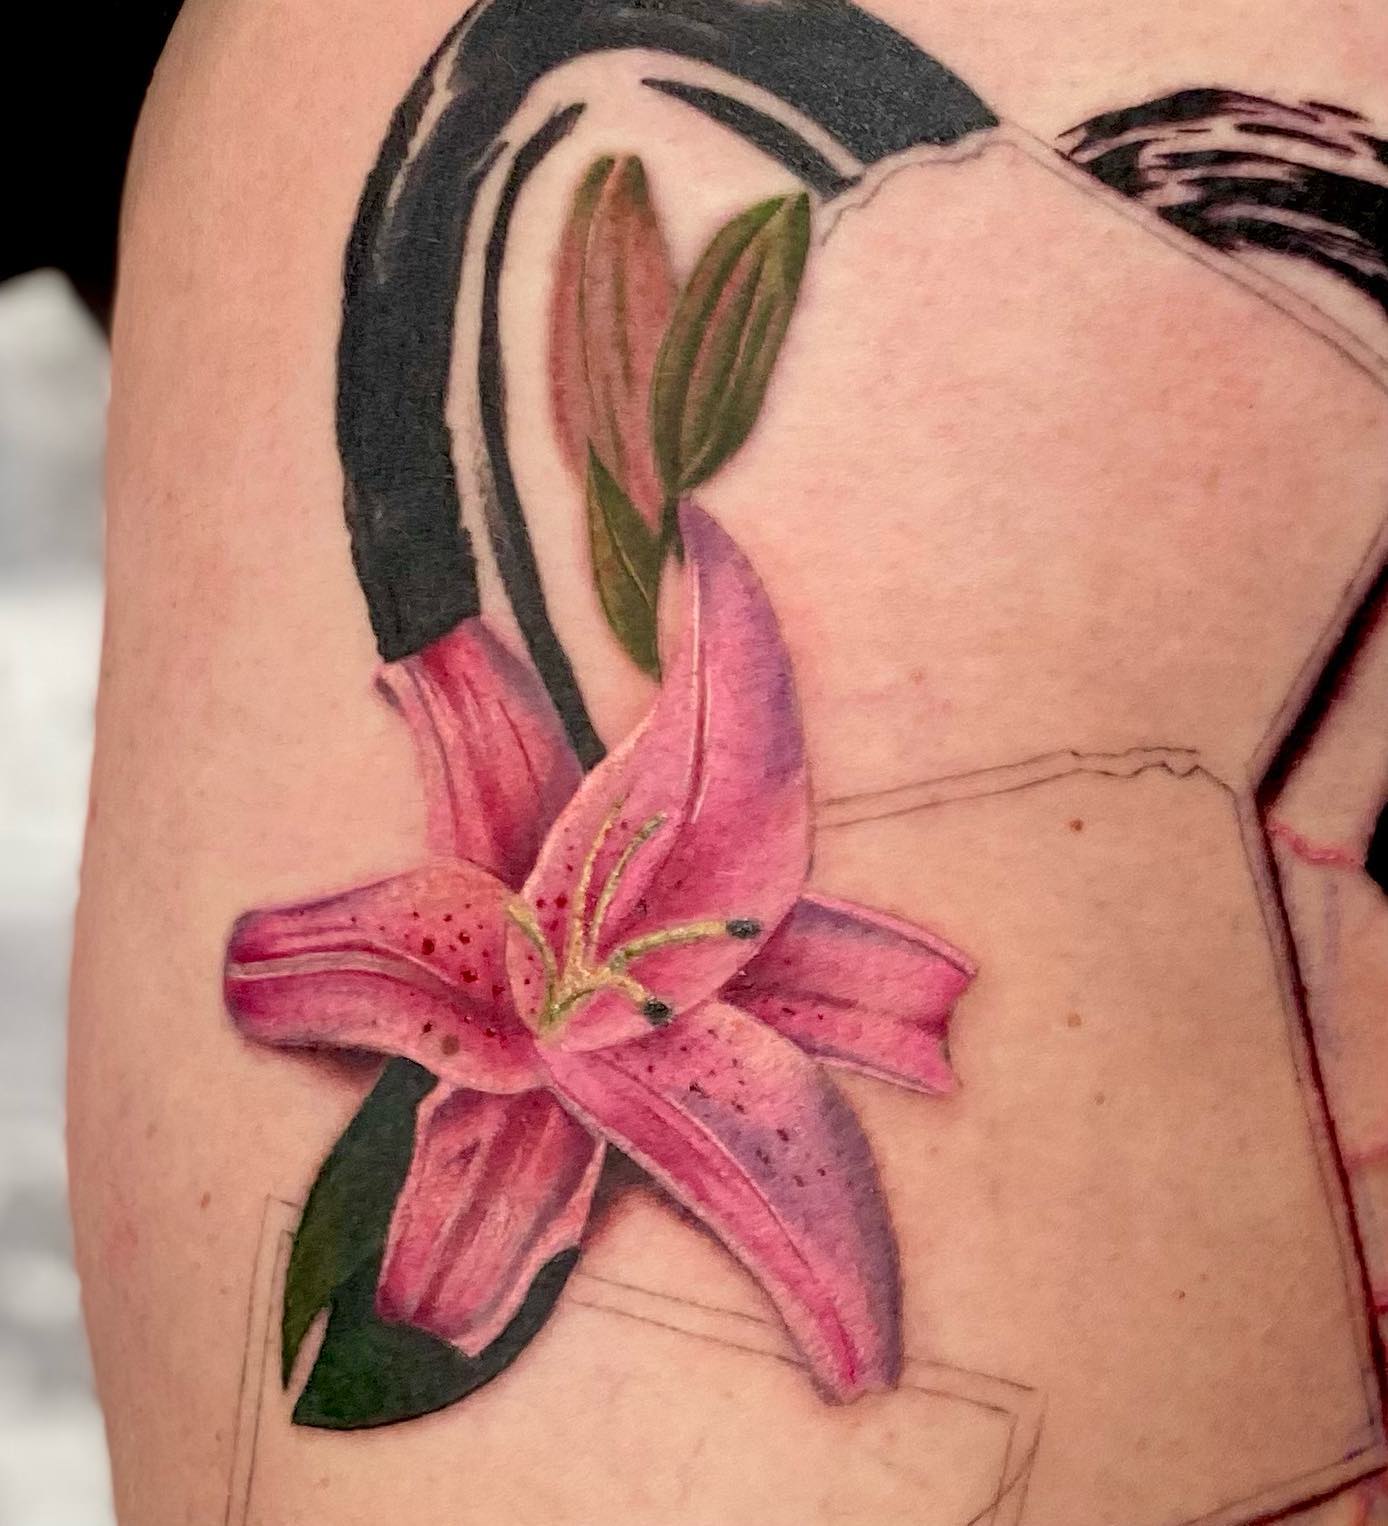 A minimal lily tattoo is all you need to be happy. It is a great way to show your love for the flower without getting a full-blown lily tattoo. Plus, a minimal lily tattoo is a safe choice and it won't upset you!